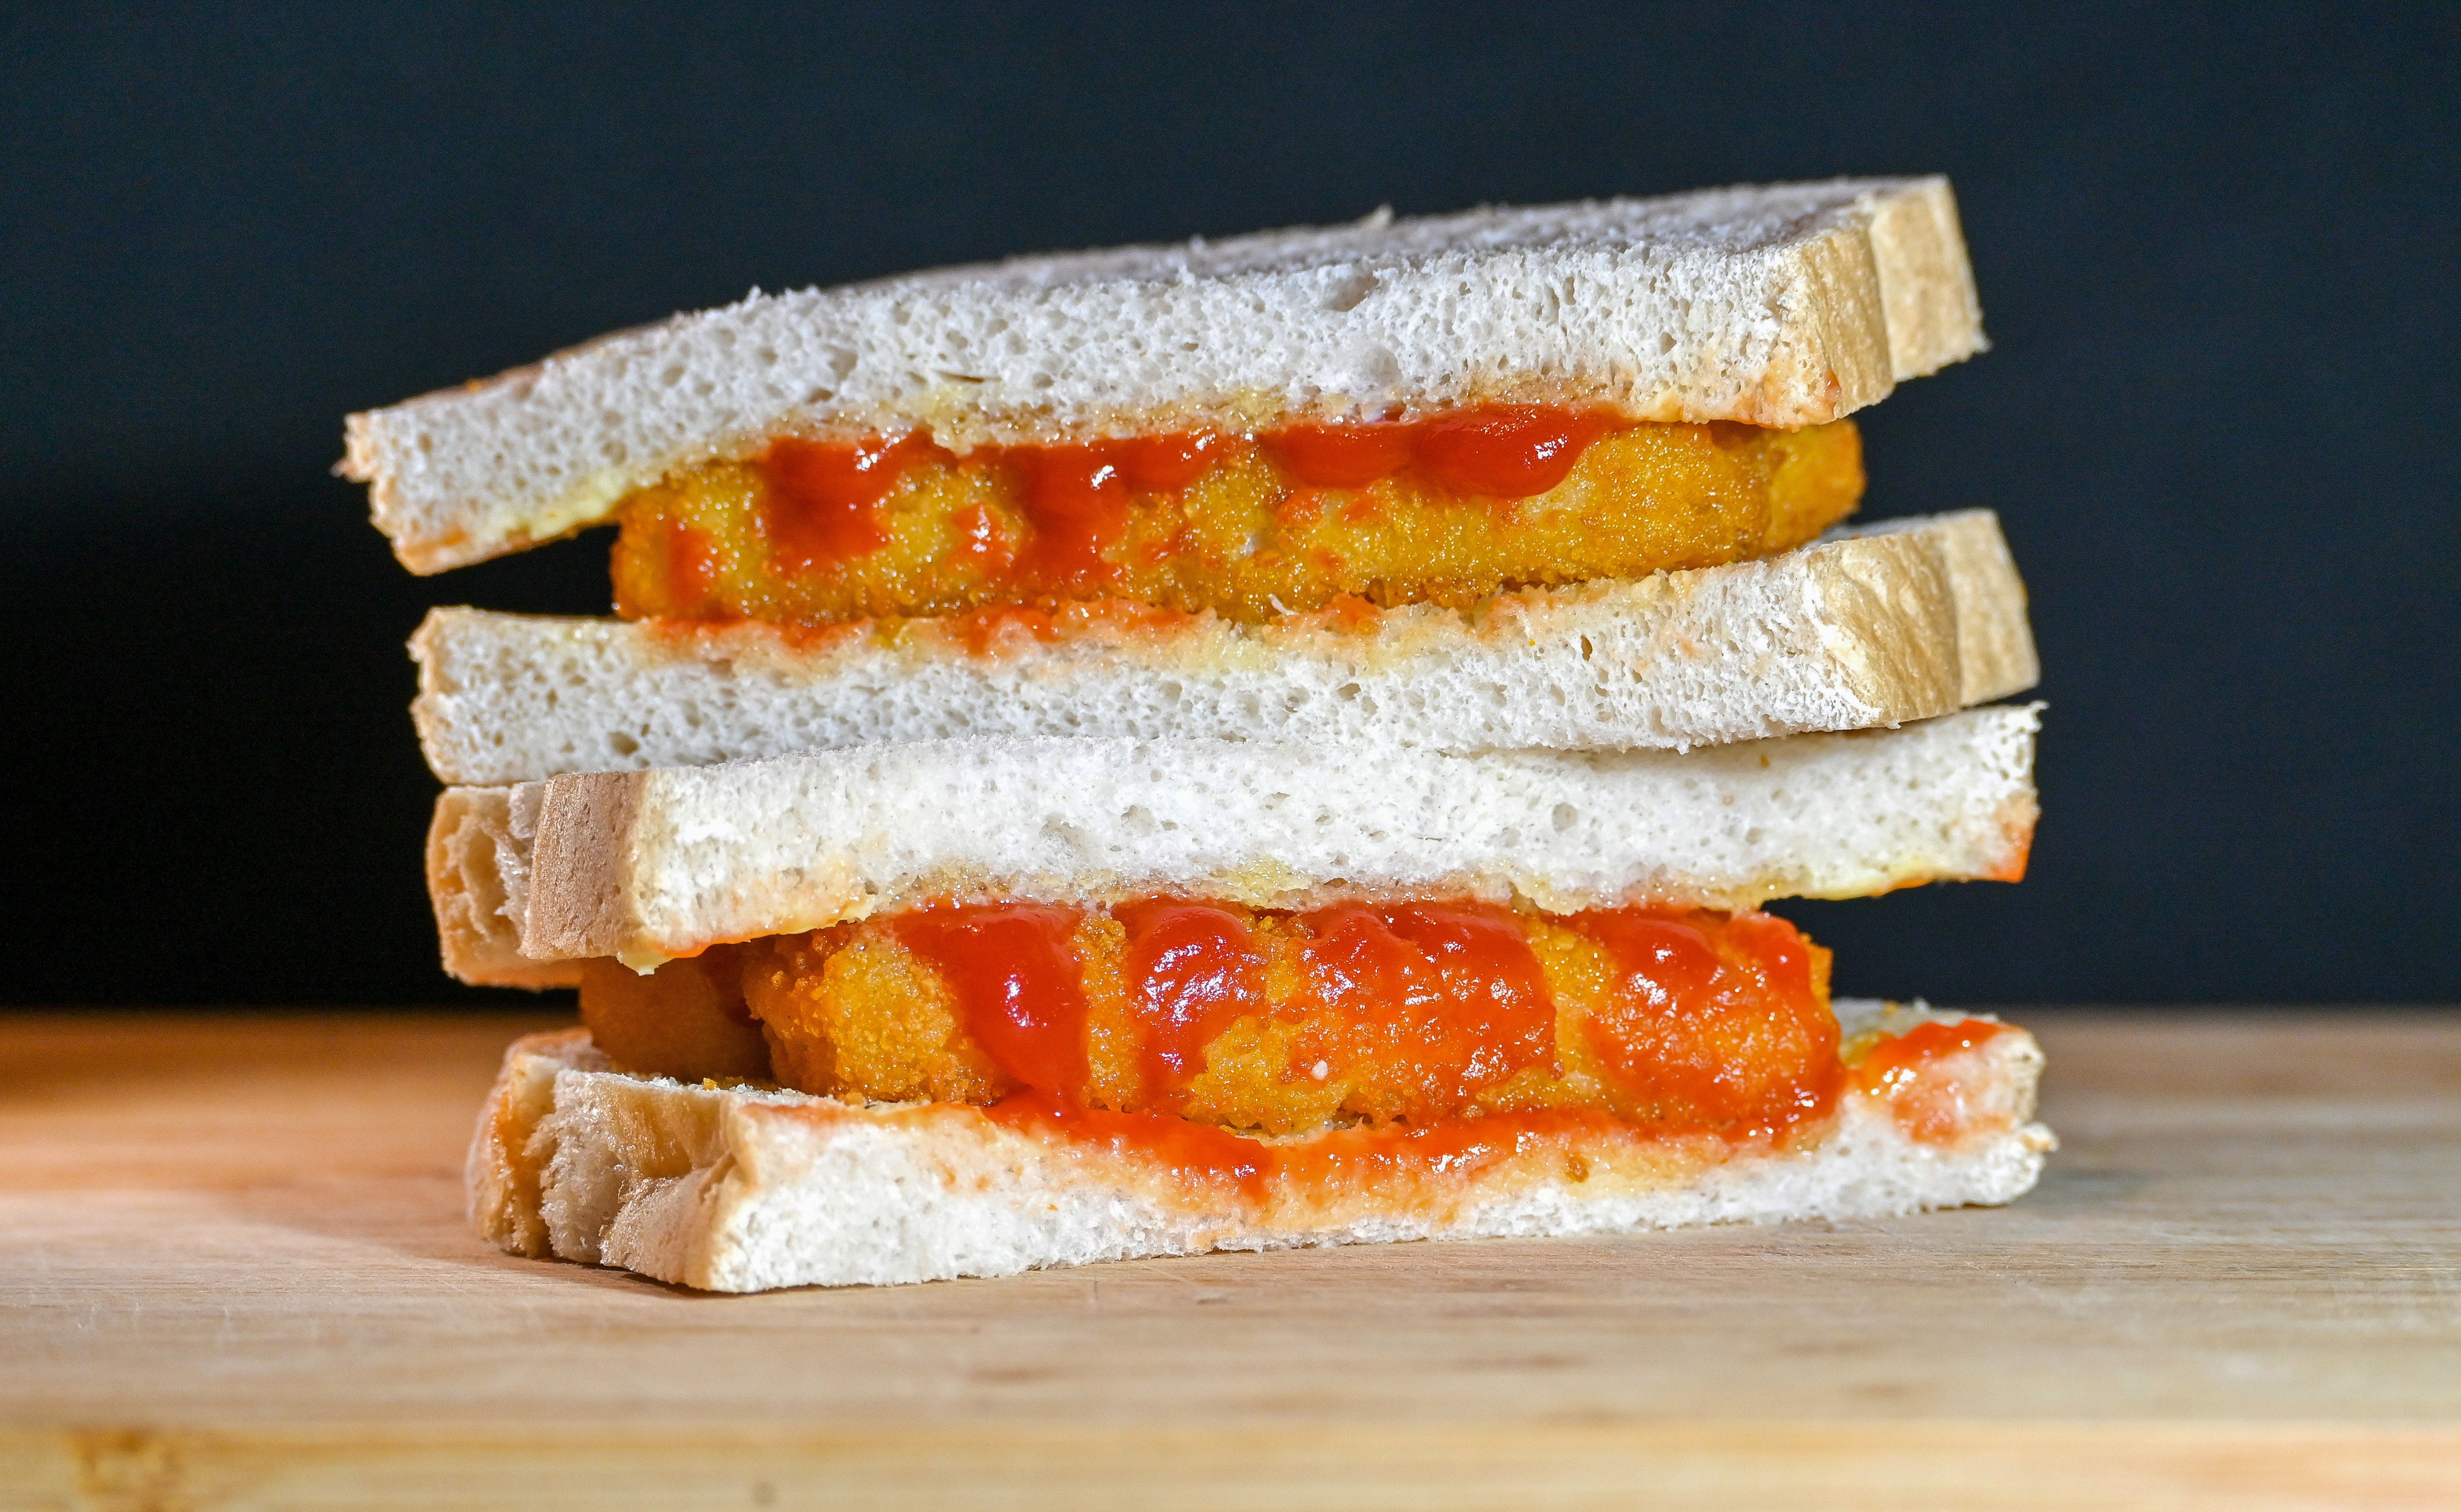 The ‘perfect’ fish finger sandwich